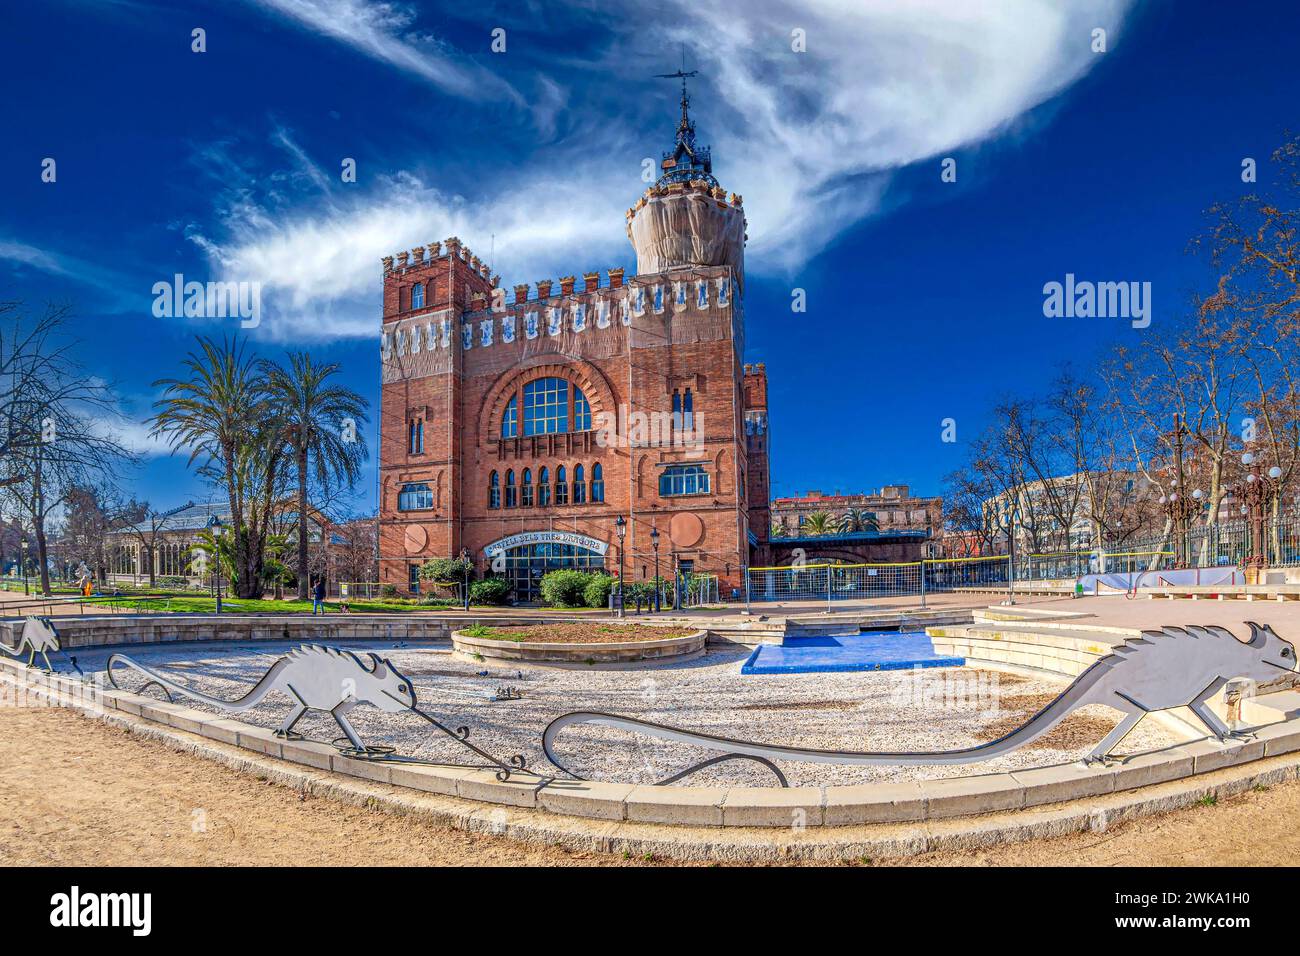 BARCELONA, SPAIN - FEBRUARY 27, 2022: The Castle of the Three Dragons, built 1887–1888 as a Café-Restaurant for the 1888 Universal Exposition of Barce Stock Photo